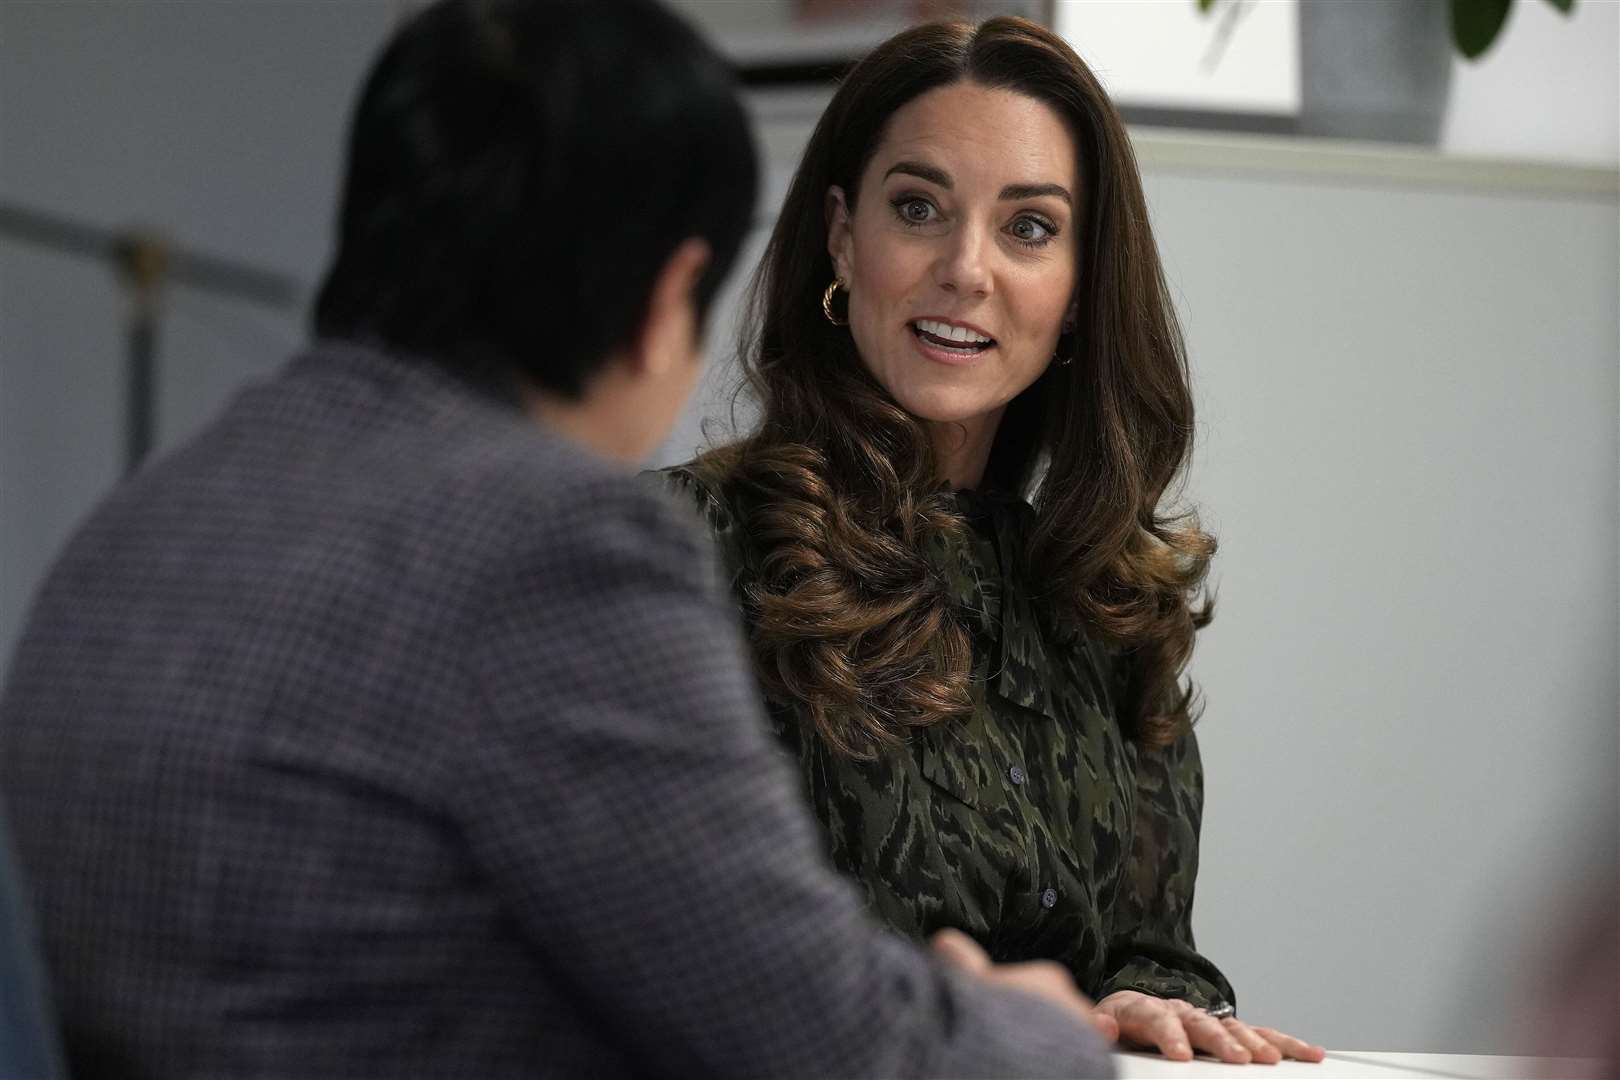 The Duchess of Cambridge speaks to members of staff during a visit to Shout in London (Alastair Grant/PA)